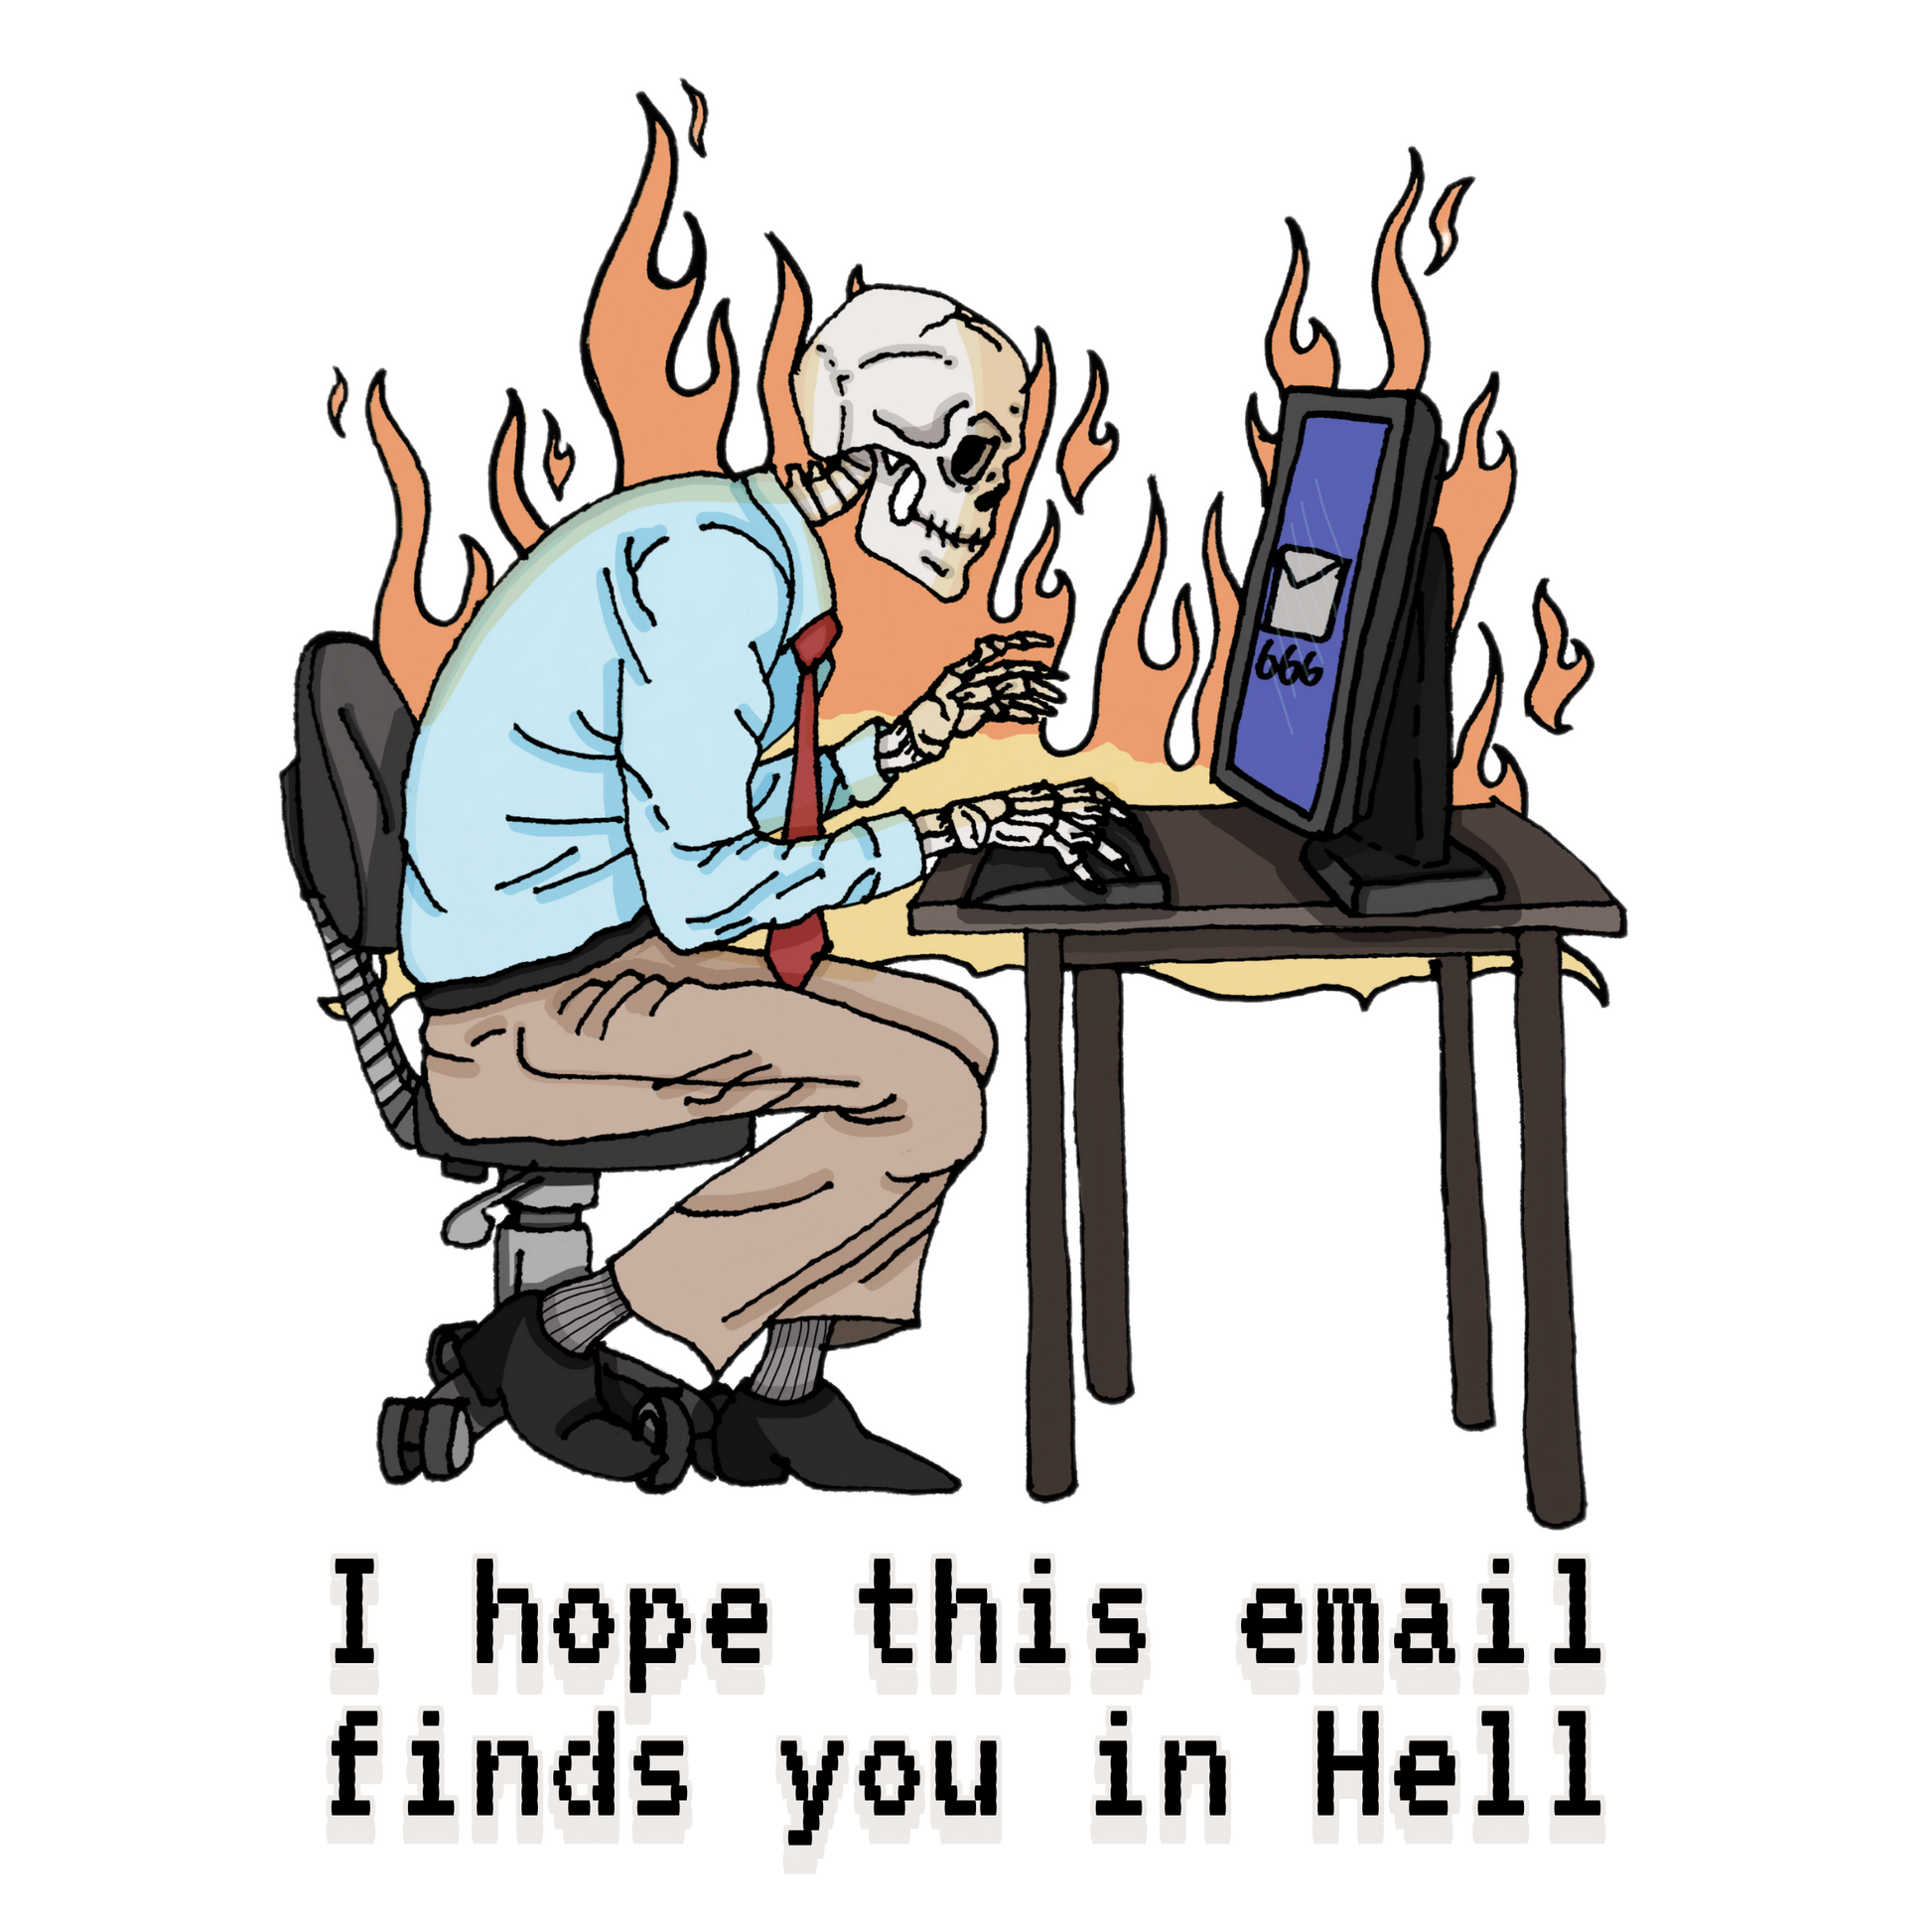 i hope this emails finds you in hell graphic design - gaslit apparel